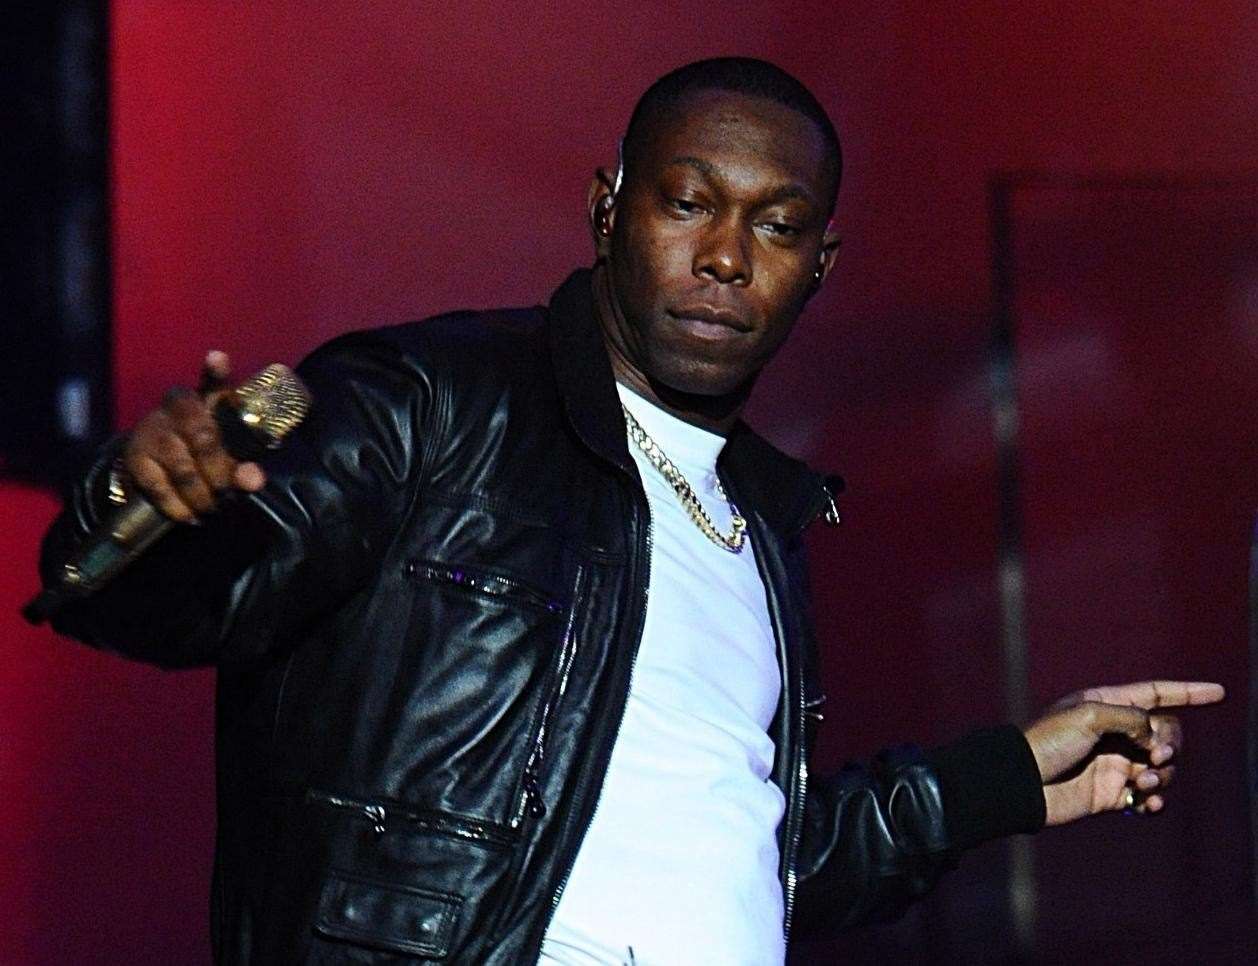 Dizzee Rascal was expected to perform